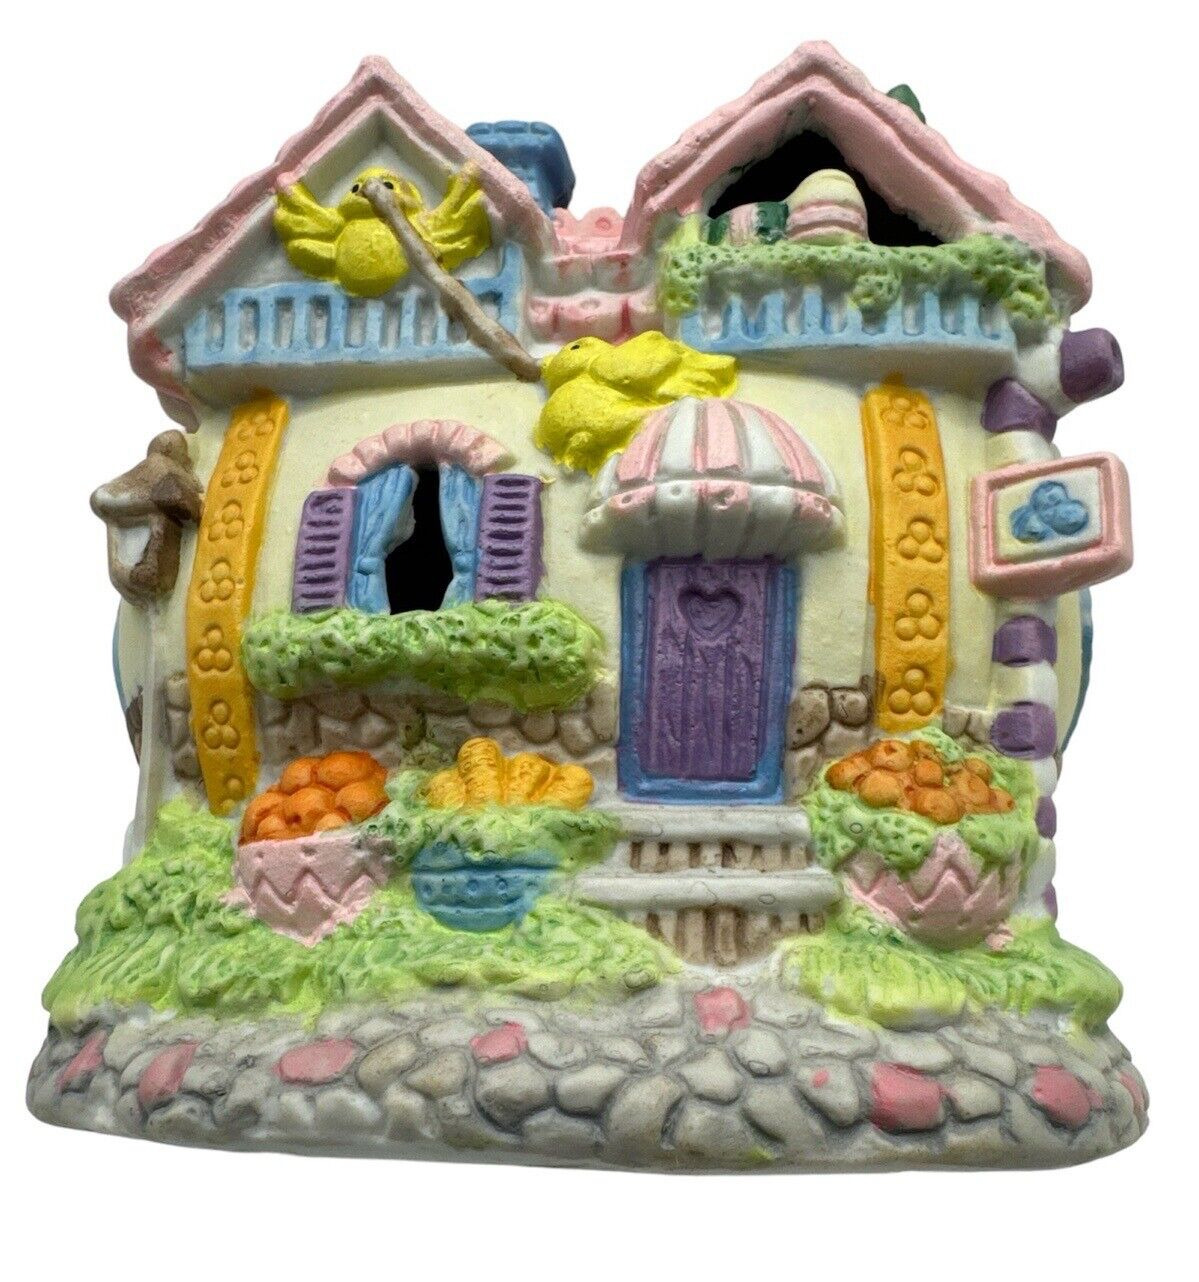 EASTER EGG Porcelain Village BAKERY Hand Painted, With Box Vintage 1993